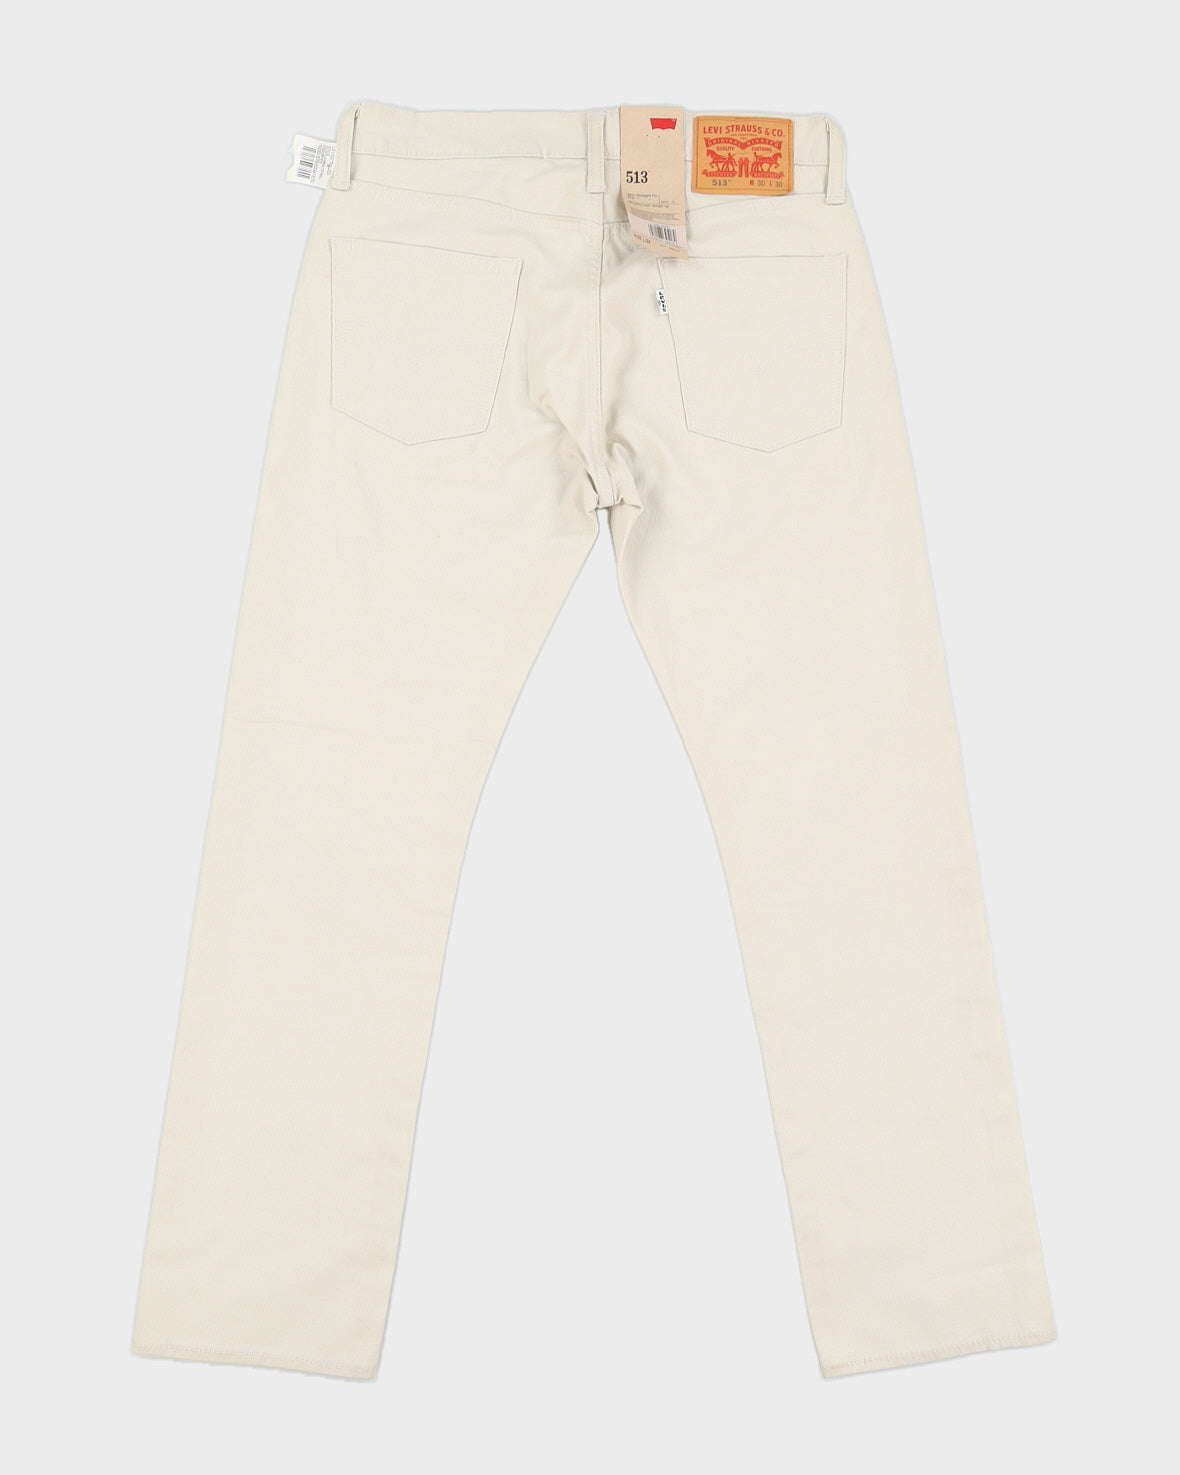 Levi's 513 Cream Trousers Deadstock With Tags - W30 L30